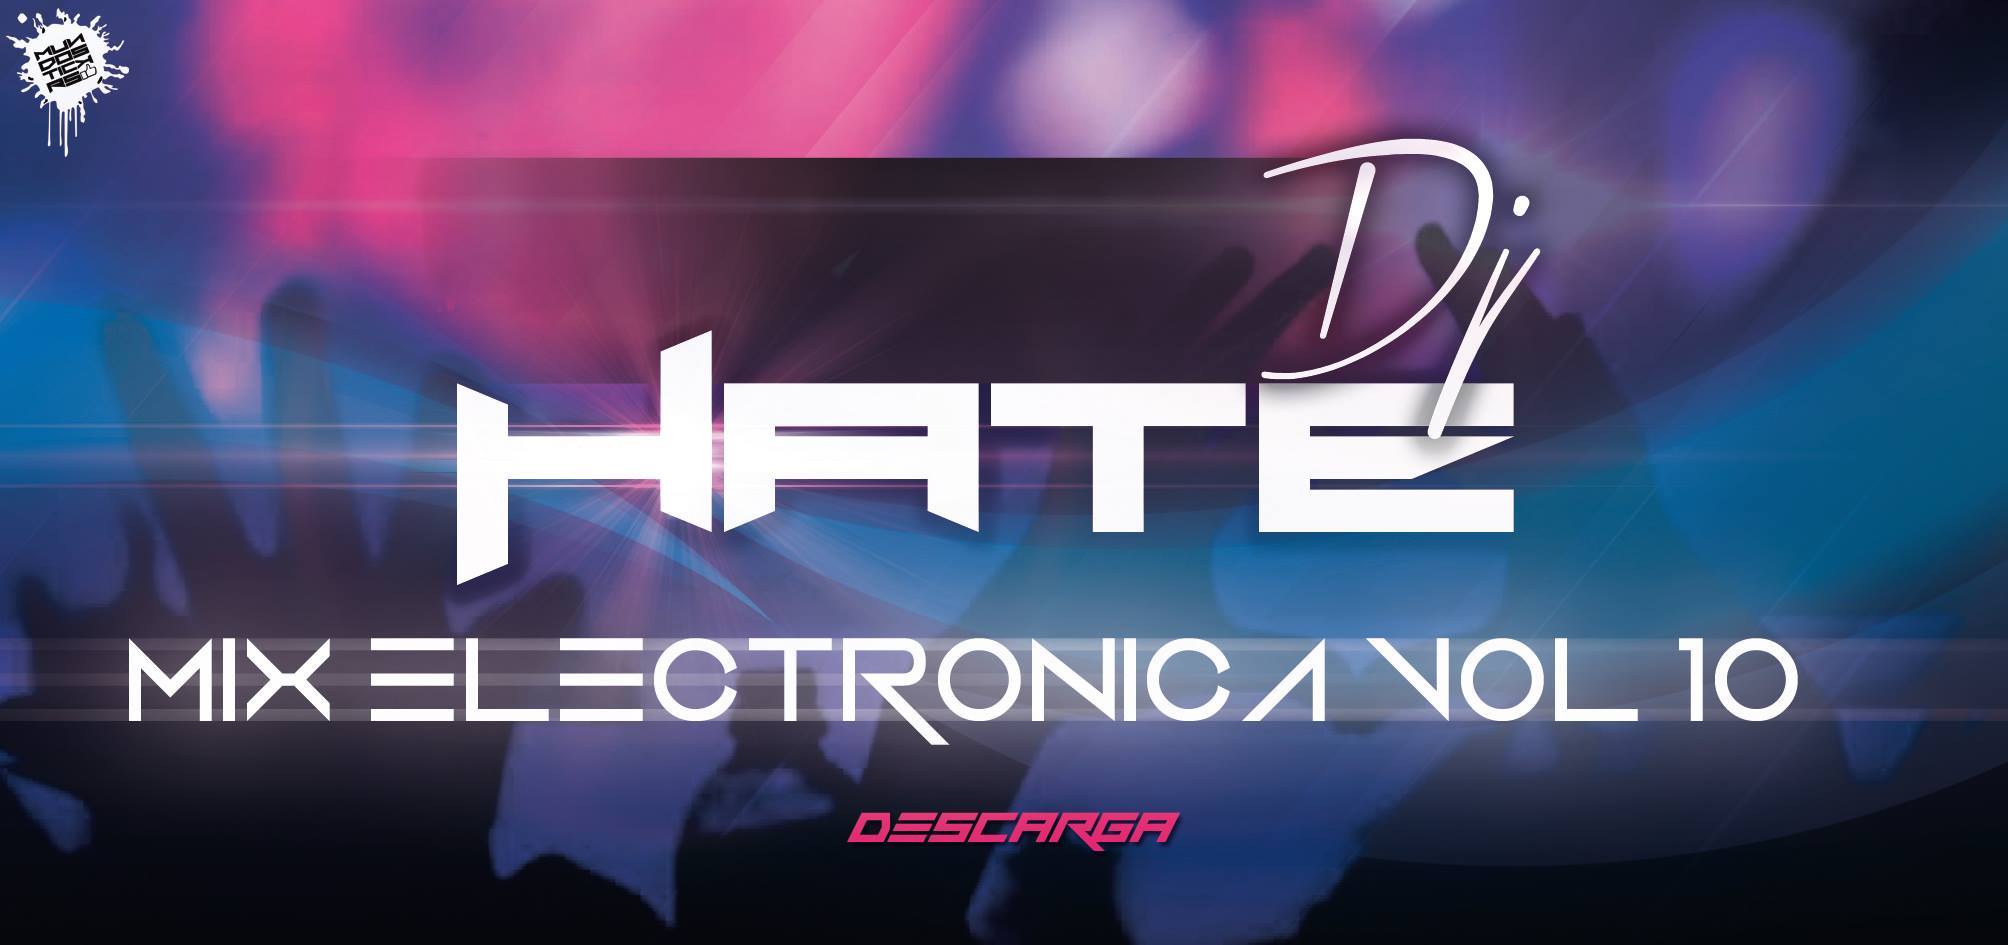 Mix Electronica 2014 [Vol.10] By [DeeJay Hate]